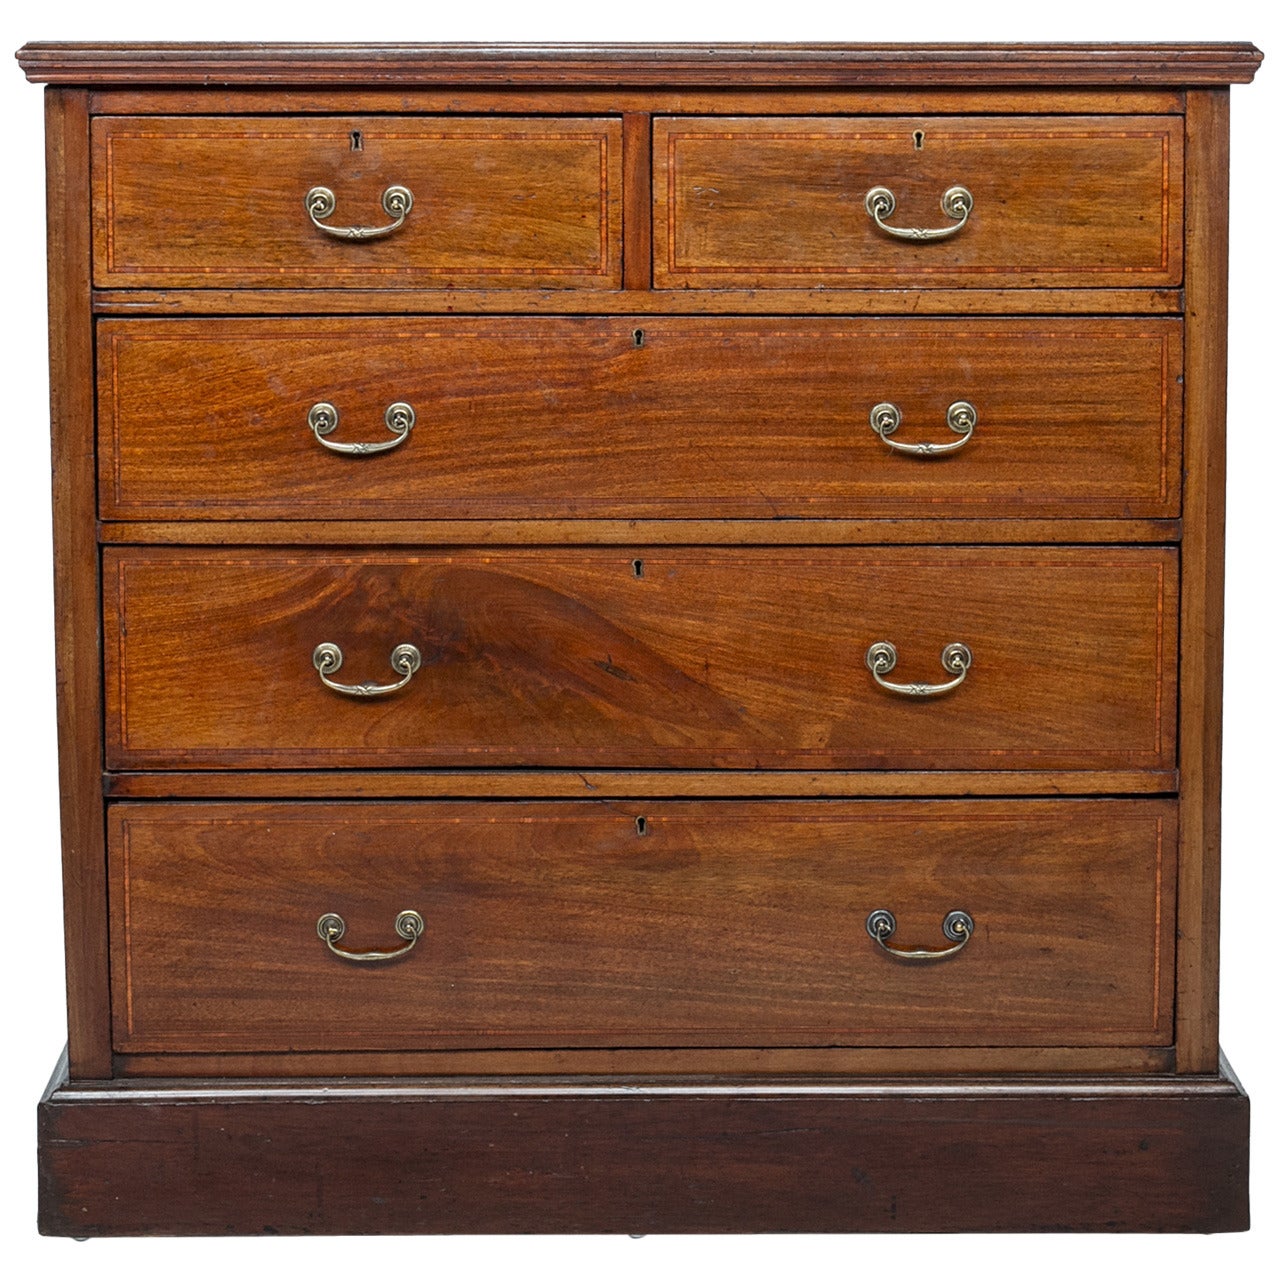 Edwardian Inlaid Chest of Drawers